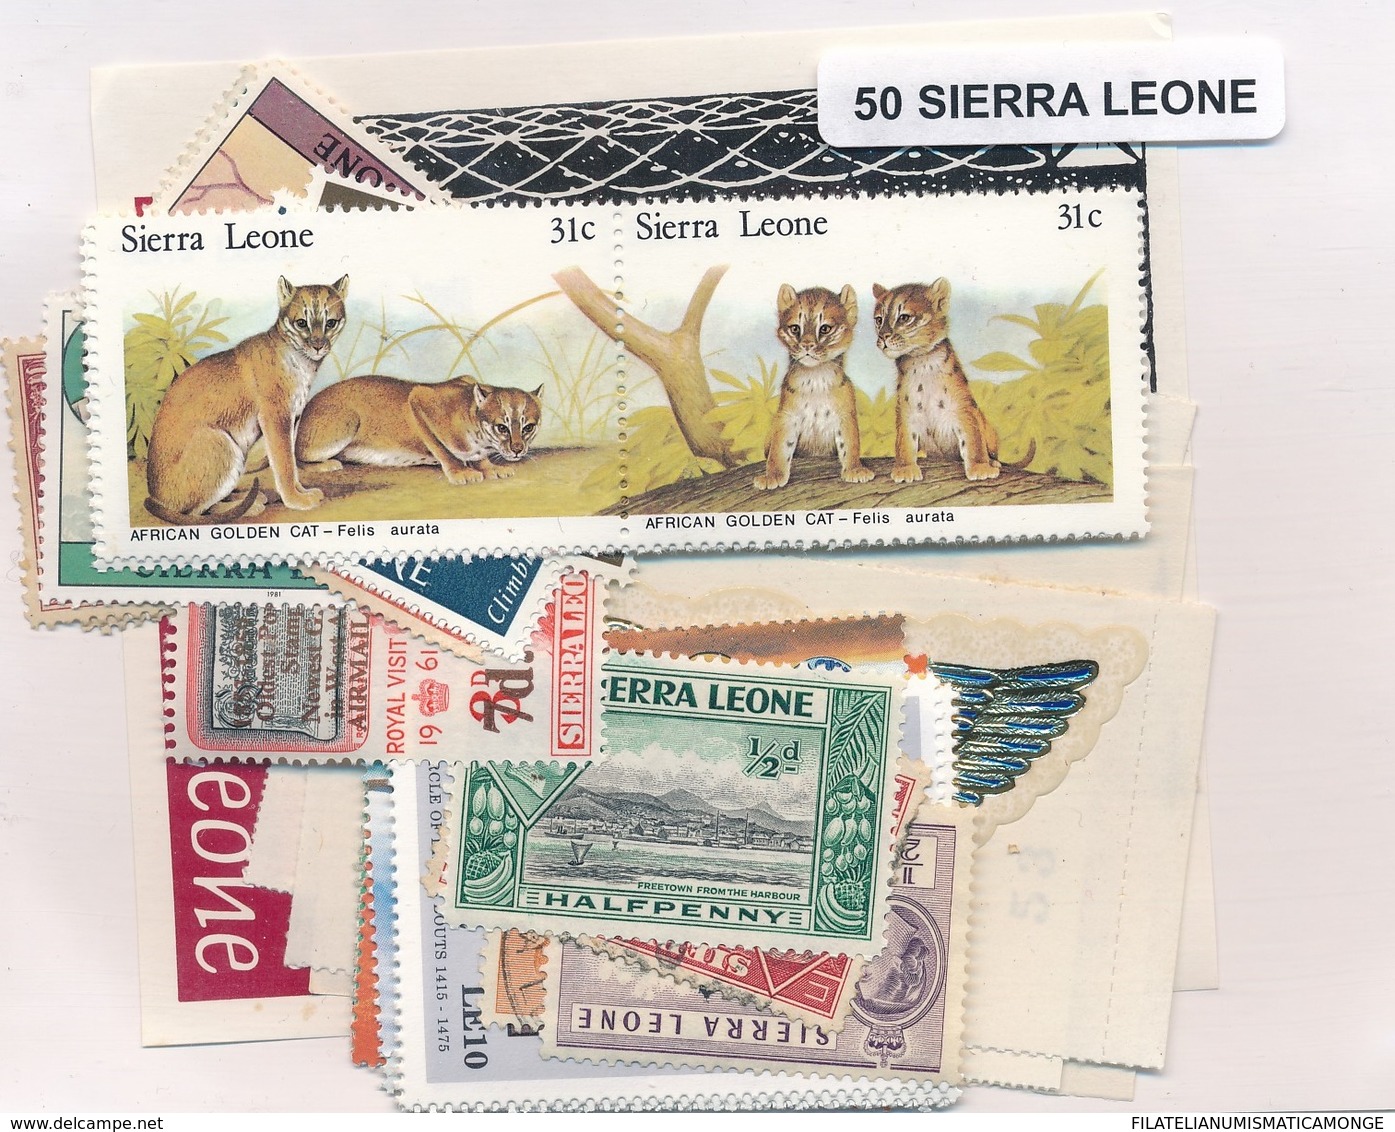 OFFER   Lot Stamp  Sierra Leona 50 Sellos Diferentes  (mixed Condition) - Lots & Kiloware (mixtures) - Max. 999 Stamps